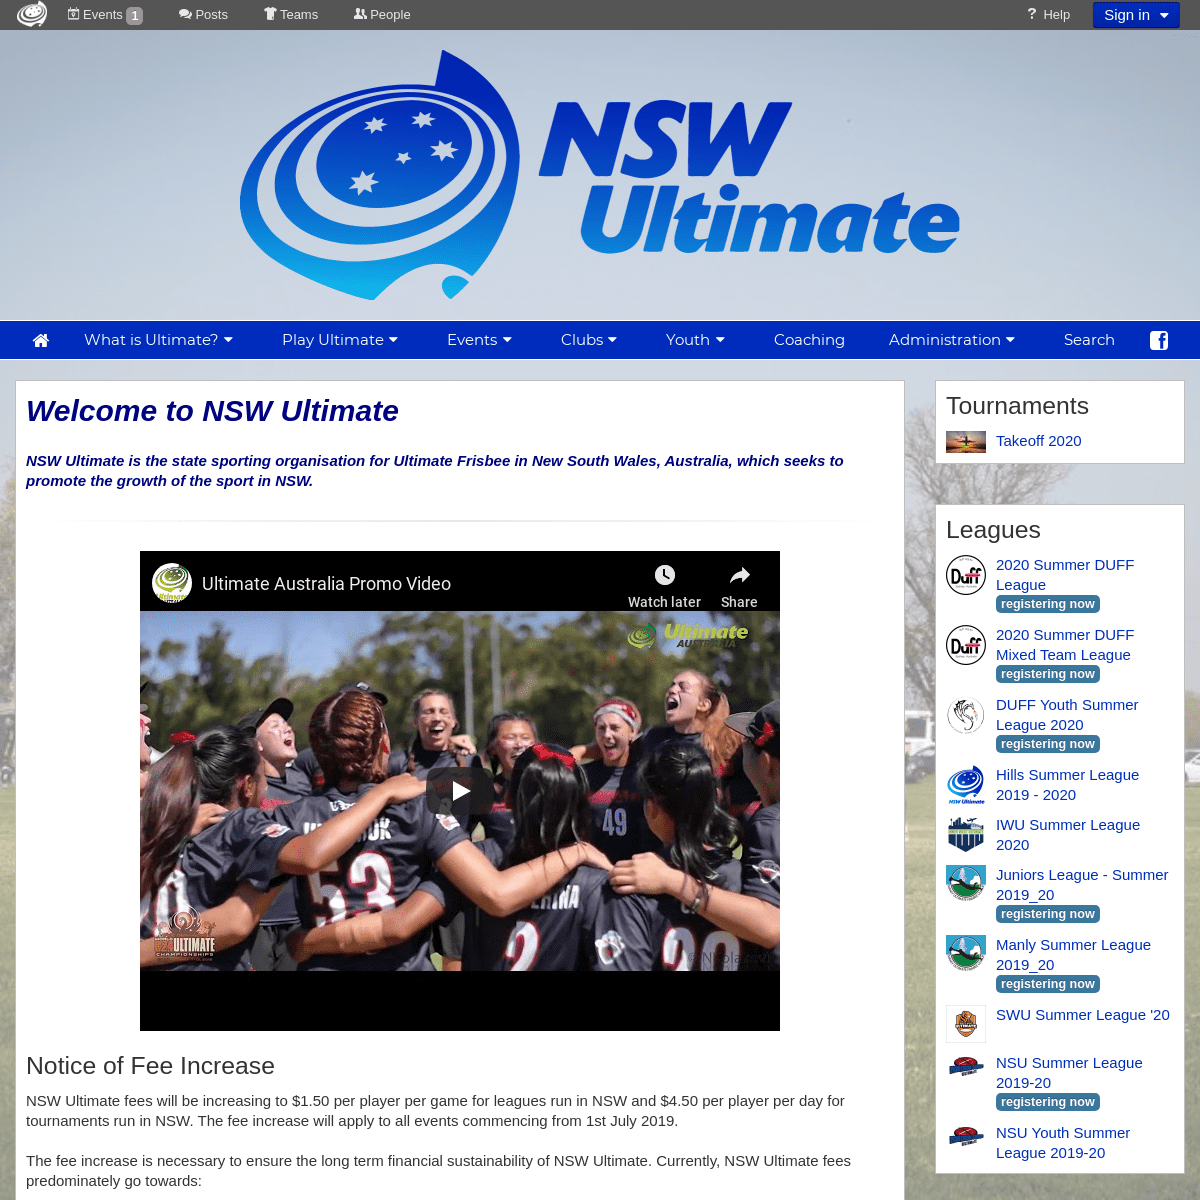 A complete backup of nswultimate.com.au